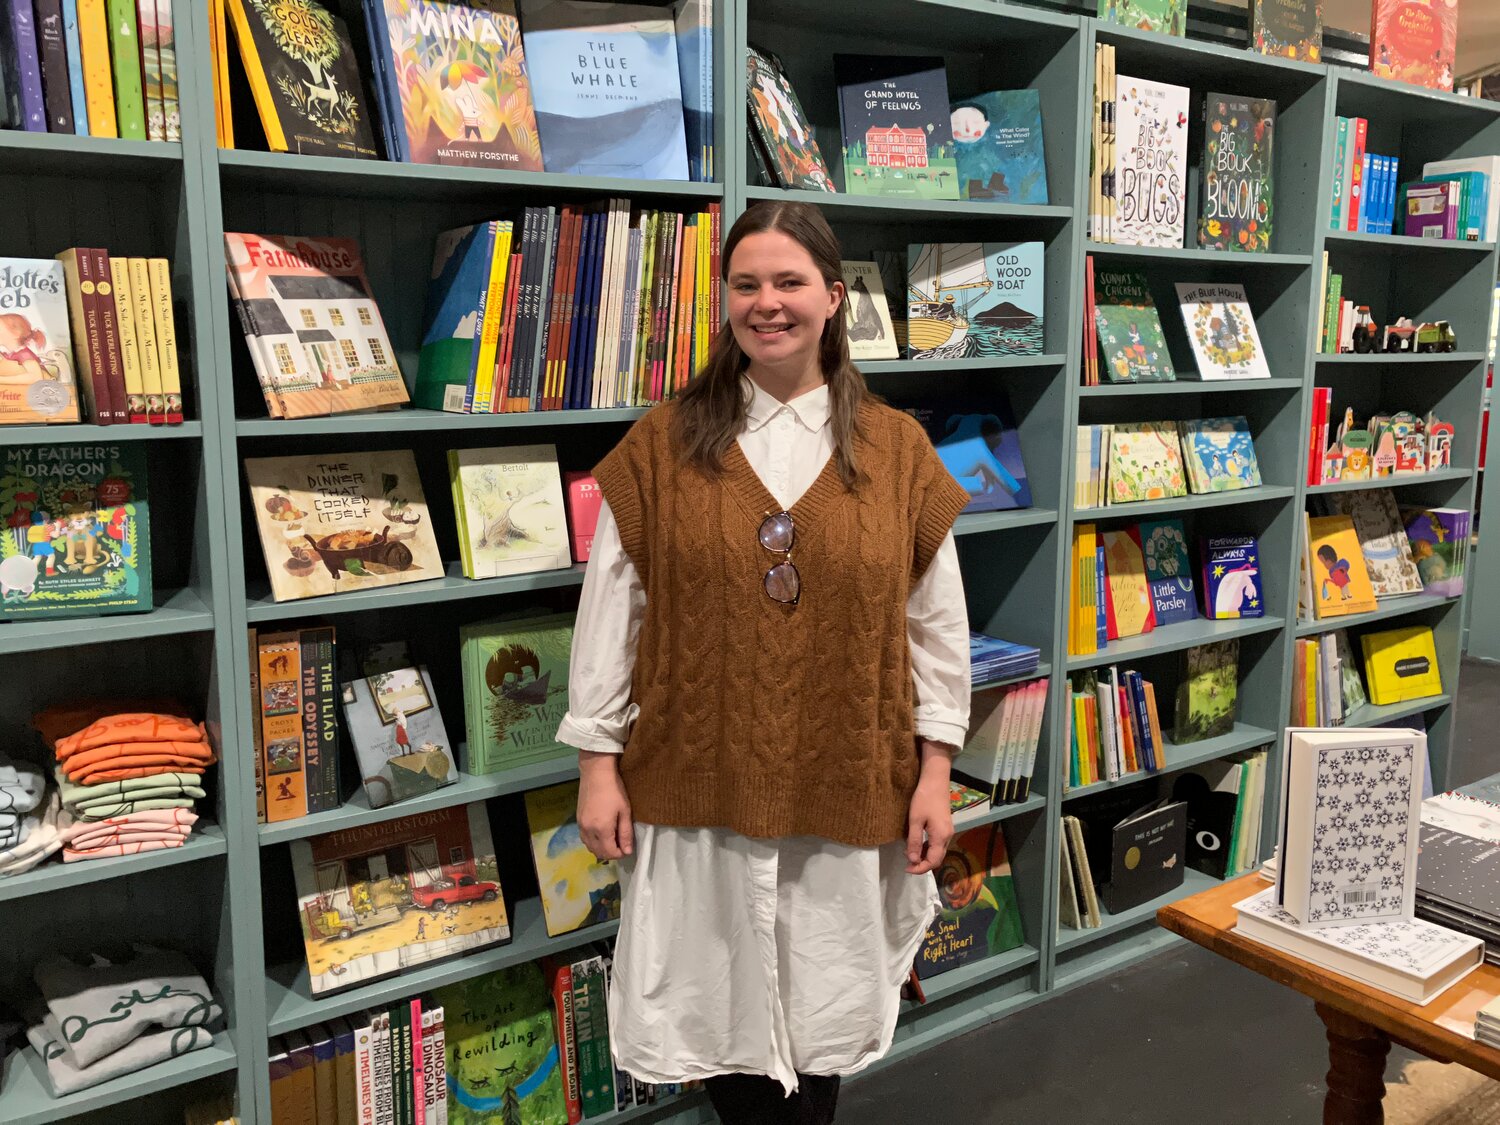 Caitlin Kranz Yaccino is the proprietor of Ratty Books, a children’s book-and-bits shop that features illustrated picture books, games and classic children’s literature for all ages.